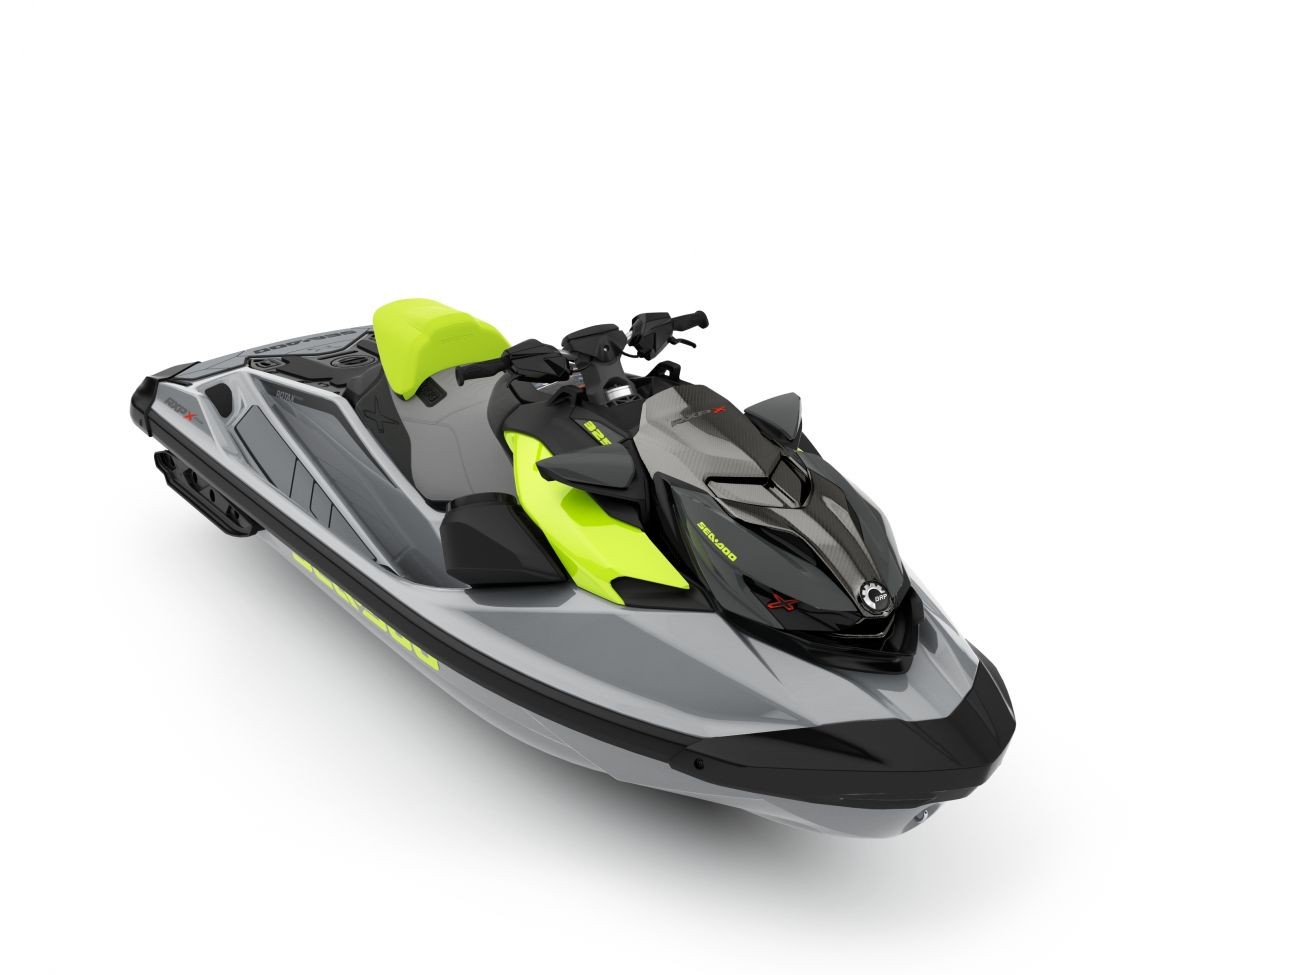  WATERSPORTS SEA-DOO_IMAGERY MY24 PERFORMANCE SEAMY24RXPXRSss325IceMetal00021RK0034FRINT